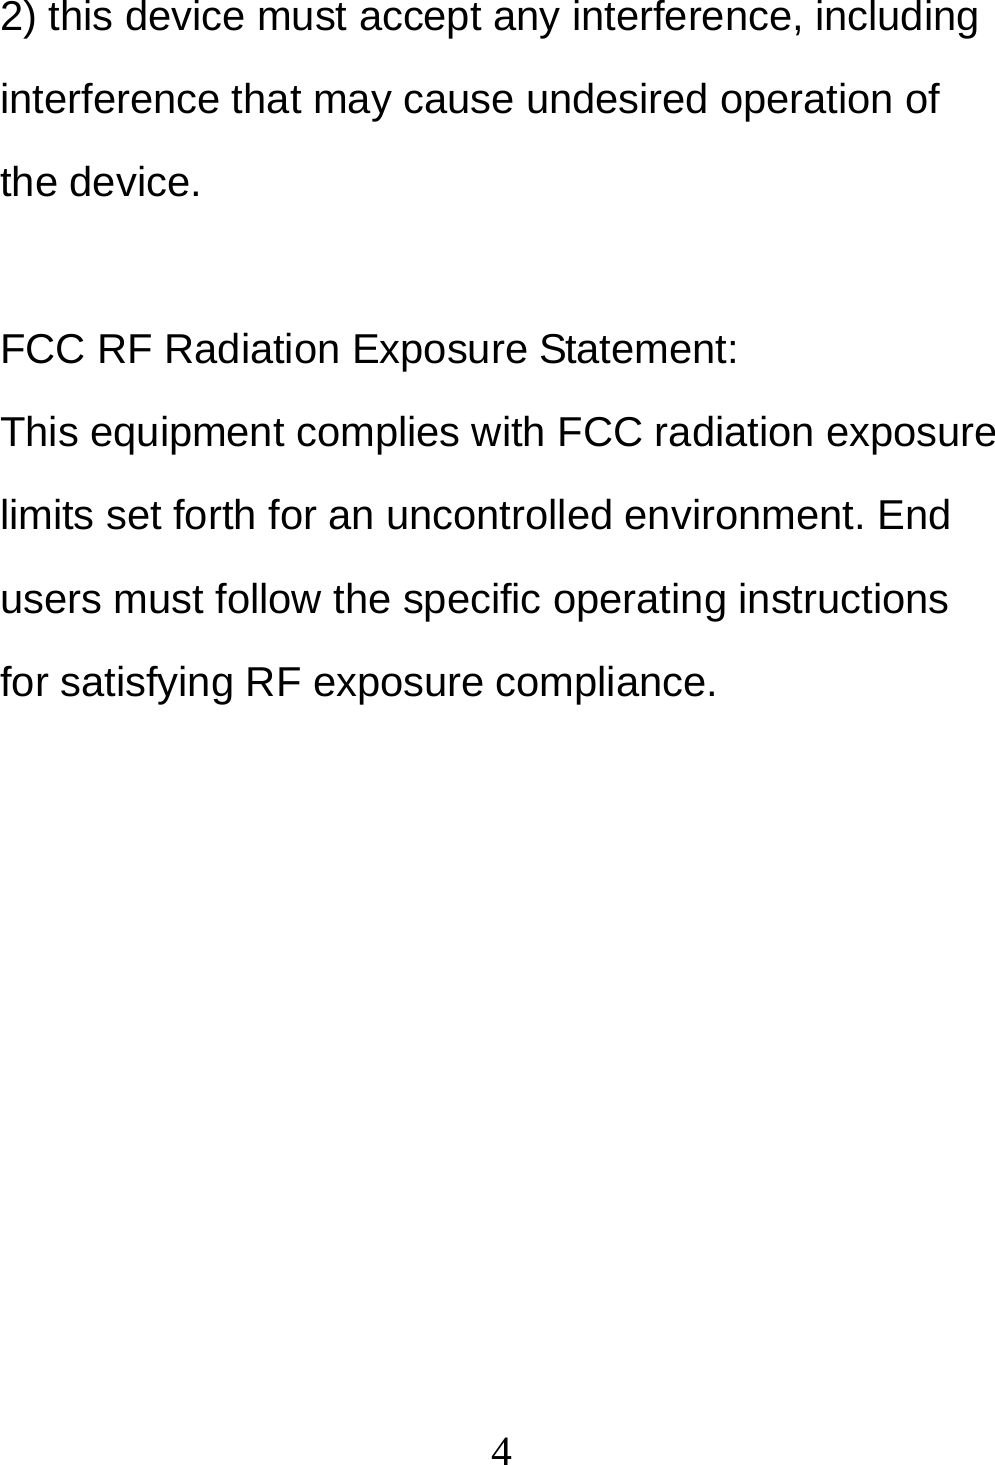  42) this device must accept any interference, including interference that may cause undesired operation of the device.  FCC RF Radiation Exposure Statement: This equipment complies with FCC radiation exposure limits set forth for an uncontrolled environment. End users must follow the specific operating instructions for satisfying RF exposure compliance.  